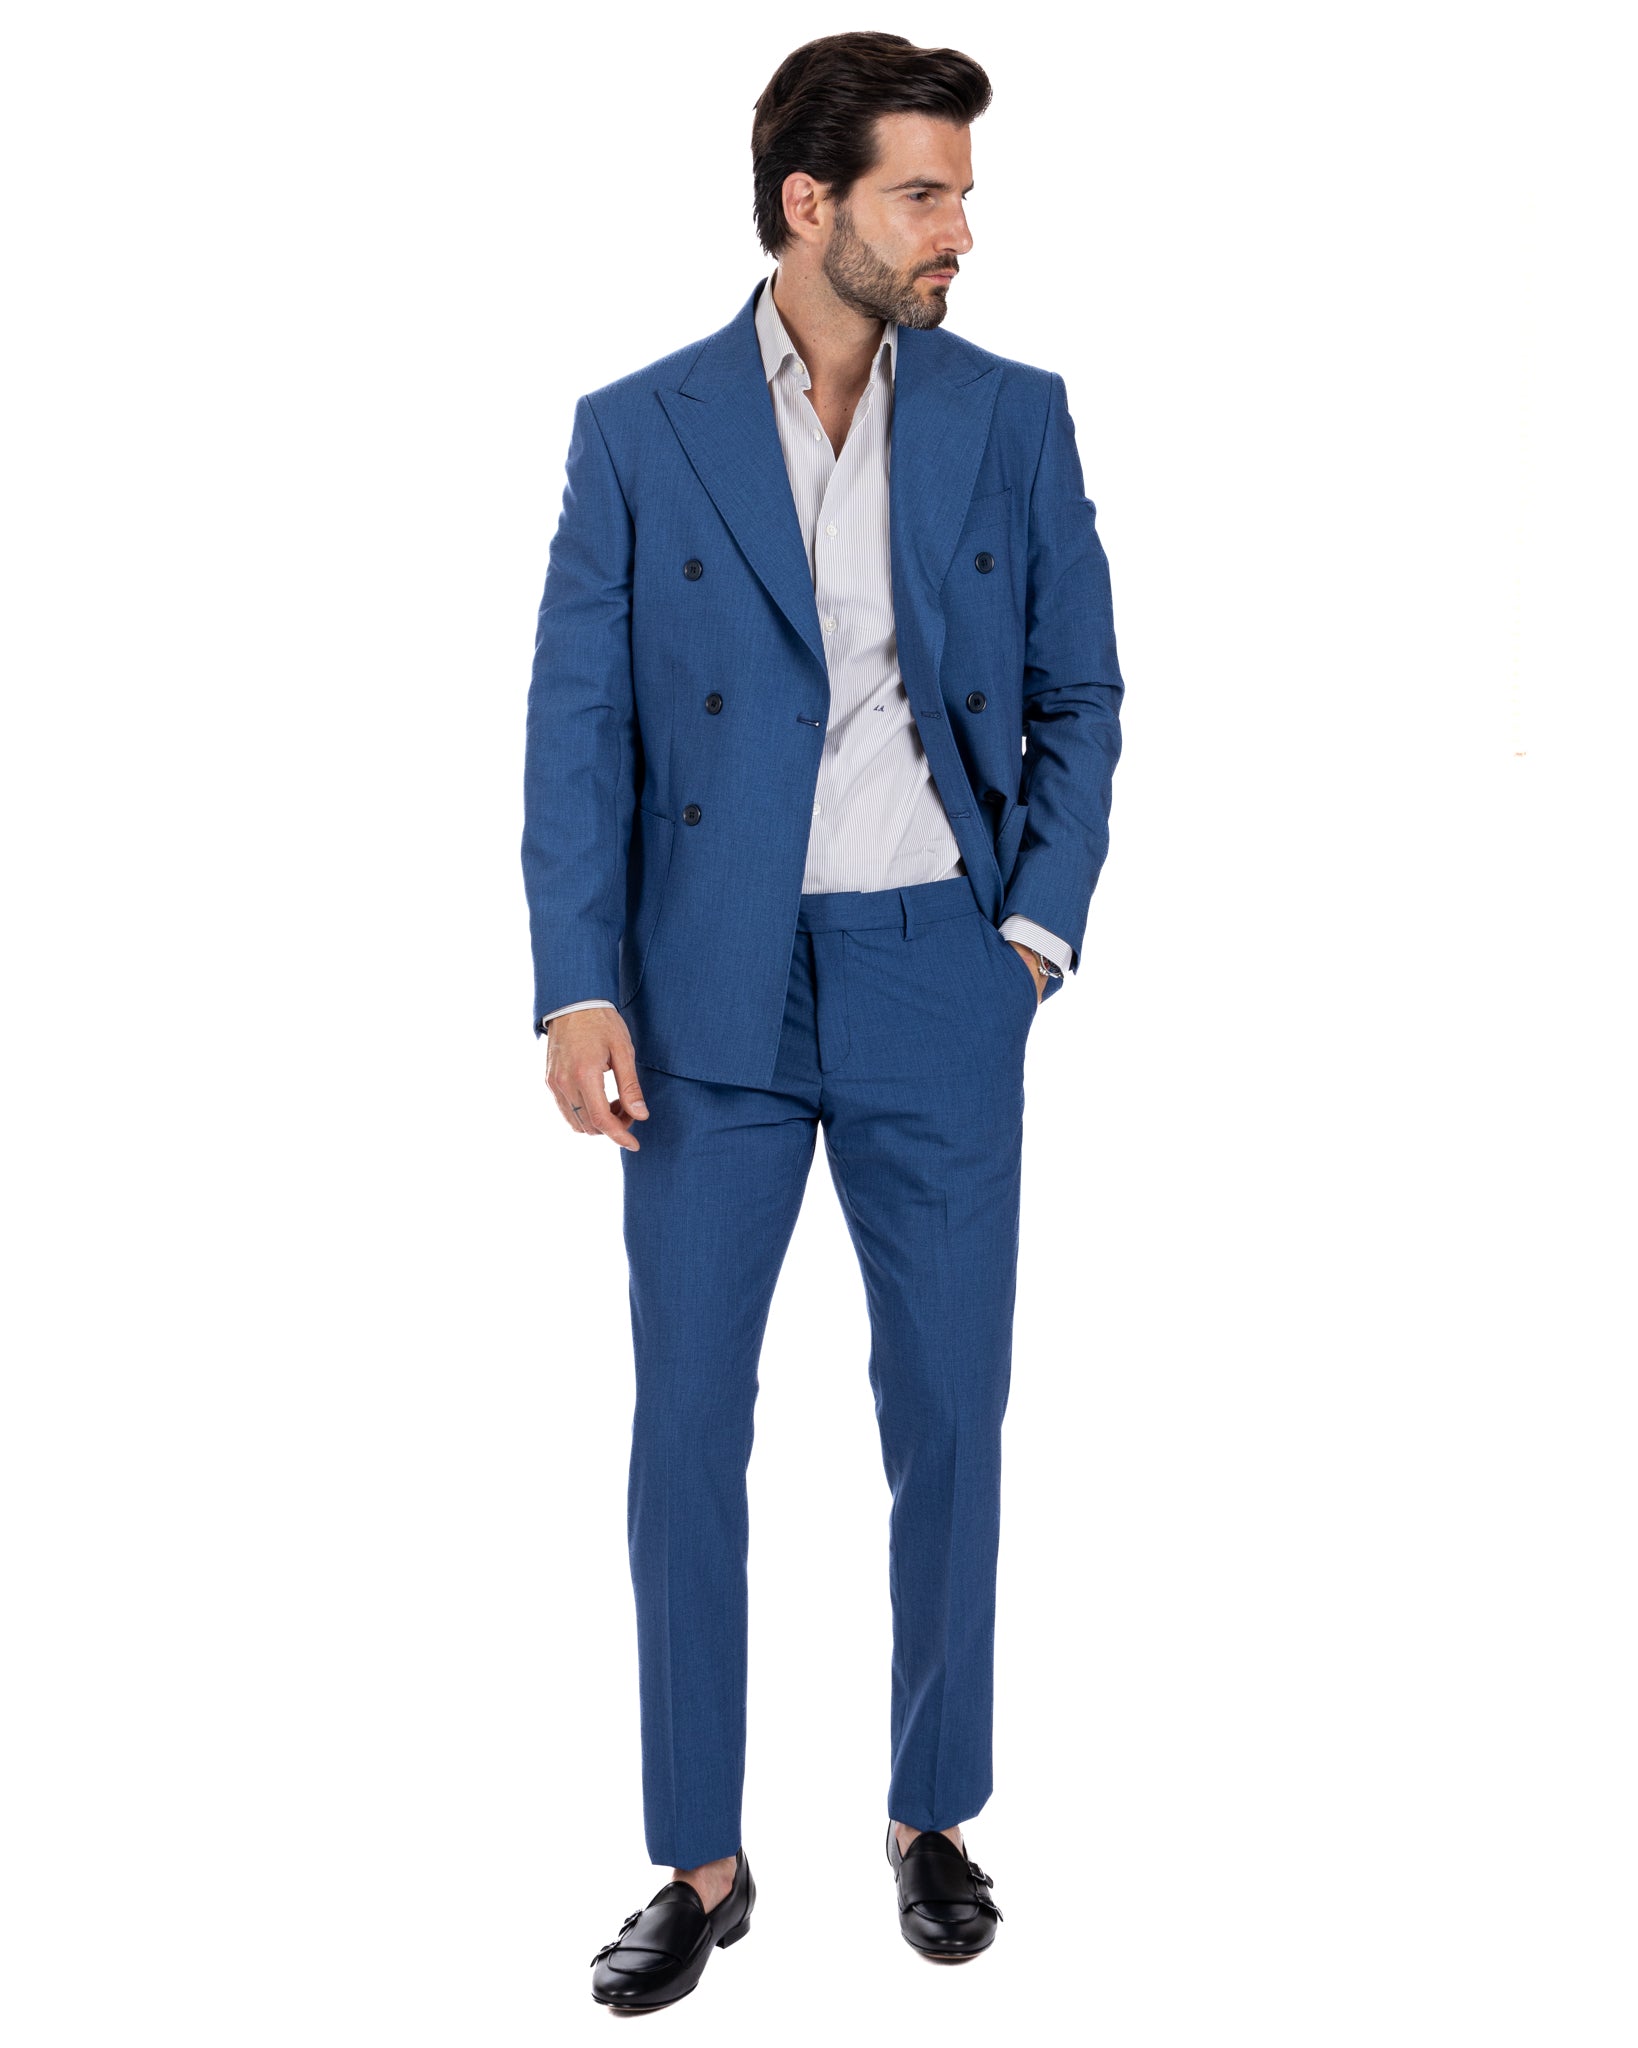 Monaco - double-breasted jeans suit